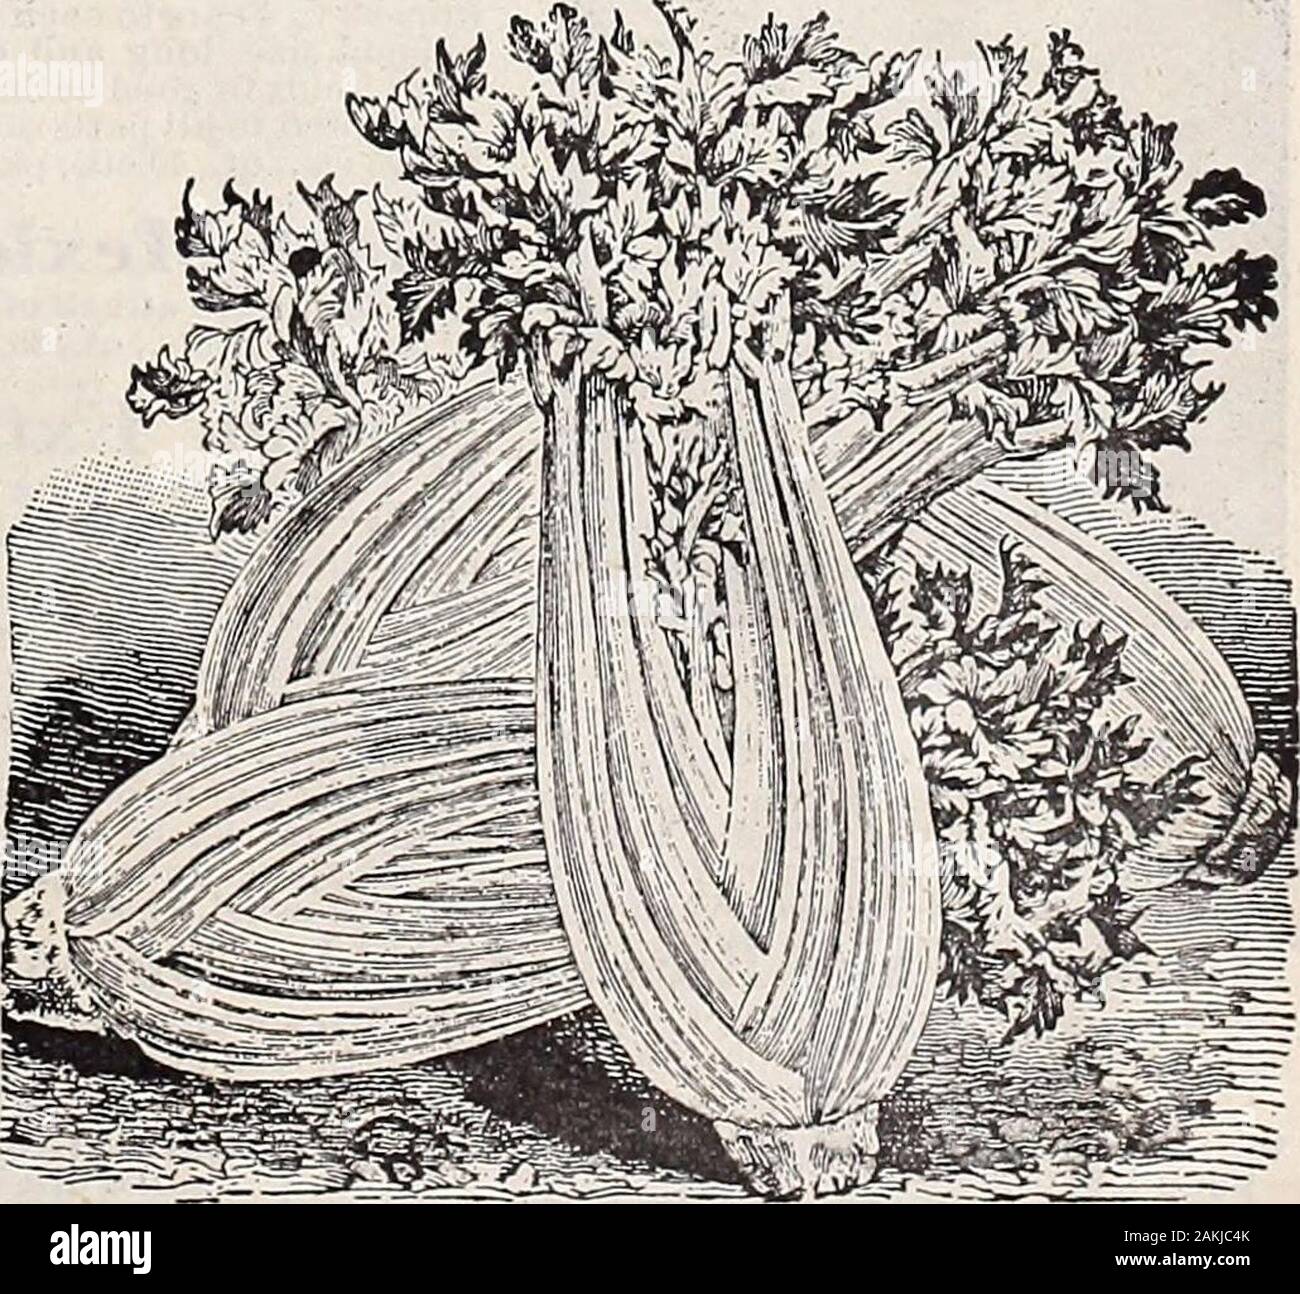 Hastings' seeds : spring 1912 catalogue . l Poloi-rr Stalks rounded, crisp and solid. Its flavor isLUCAitdU omiu vjcici y funy equal to that grown in the famous Kalama-zoo (Mich.) celery district, having the rich, nutty flavor so desirable in celeryPacket, 10 cents; % ounce, 15 cents; ounce, 25 cents; % pound, 65 cents pound, $2.00* Whifp PlniriA (riant Pnennl 01d&gt; wel1 known varieties, preferred TT Hilt? rilllllt* Uldlll JTdhCdl Dy many planters. Each: Packet, 5cents; ounce, 15 cents; % pound, 50 cents: pound, $1.50.Cplprifif* or Turnip Rooted Celery. It is mostly used for flavoring. ldl&g Stock Photo